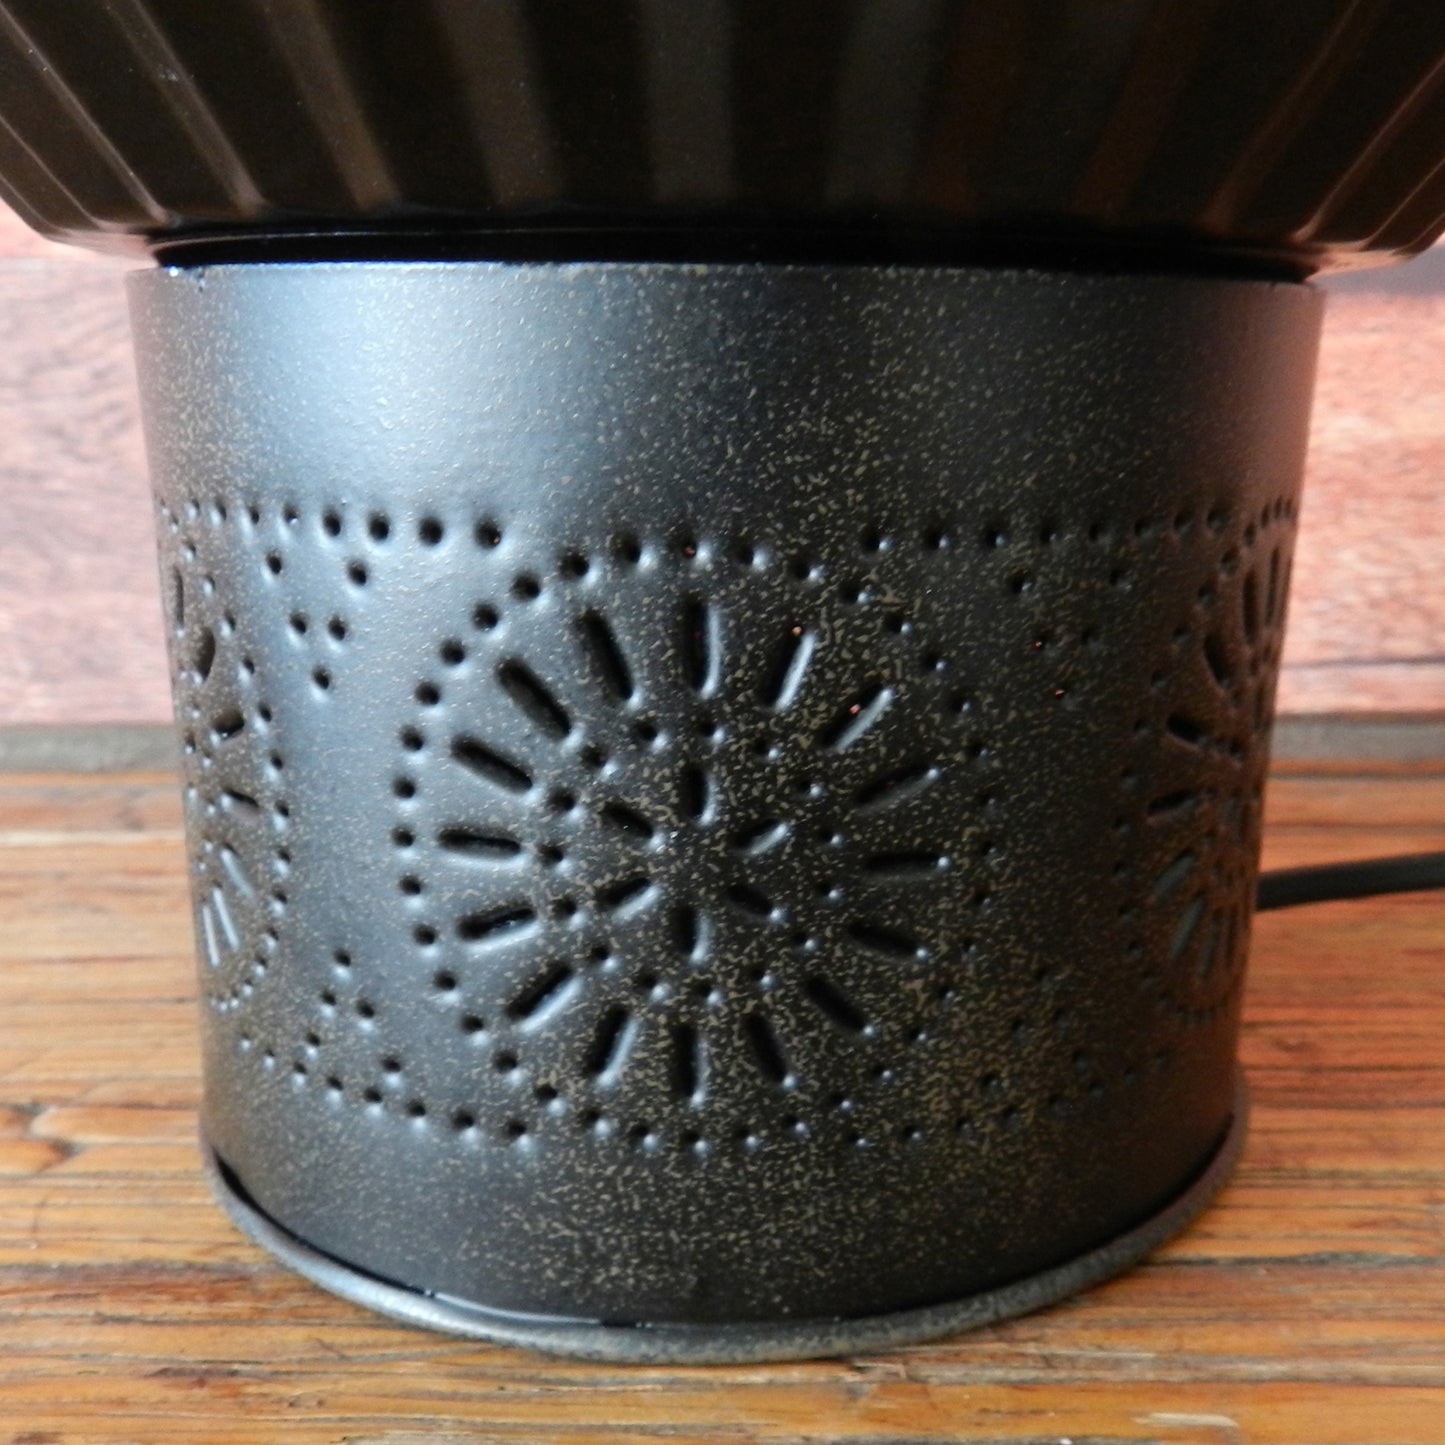 CVHOMEDECO. Grungy Black Metal Tin Punched Finished Mini Melt Wax Tart Warmer Country Primitive Home Decoration